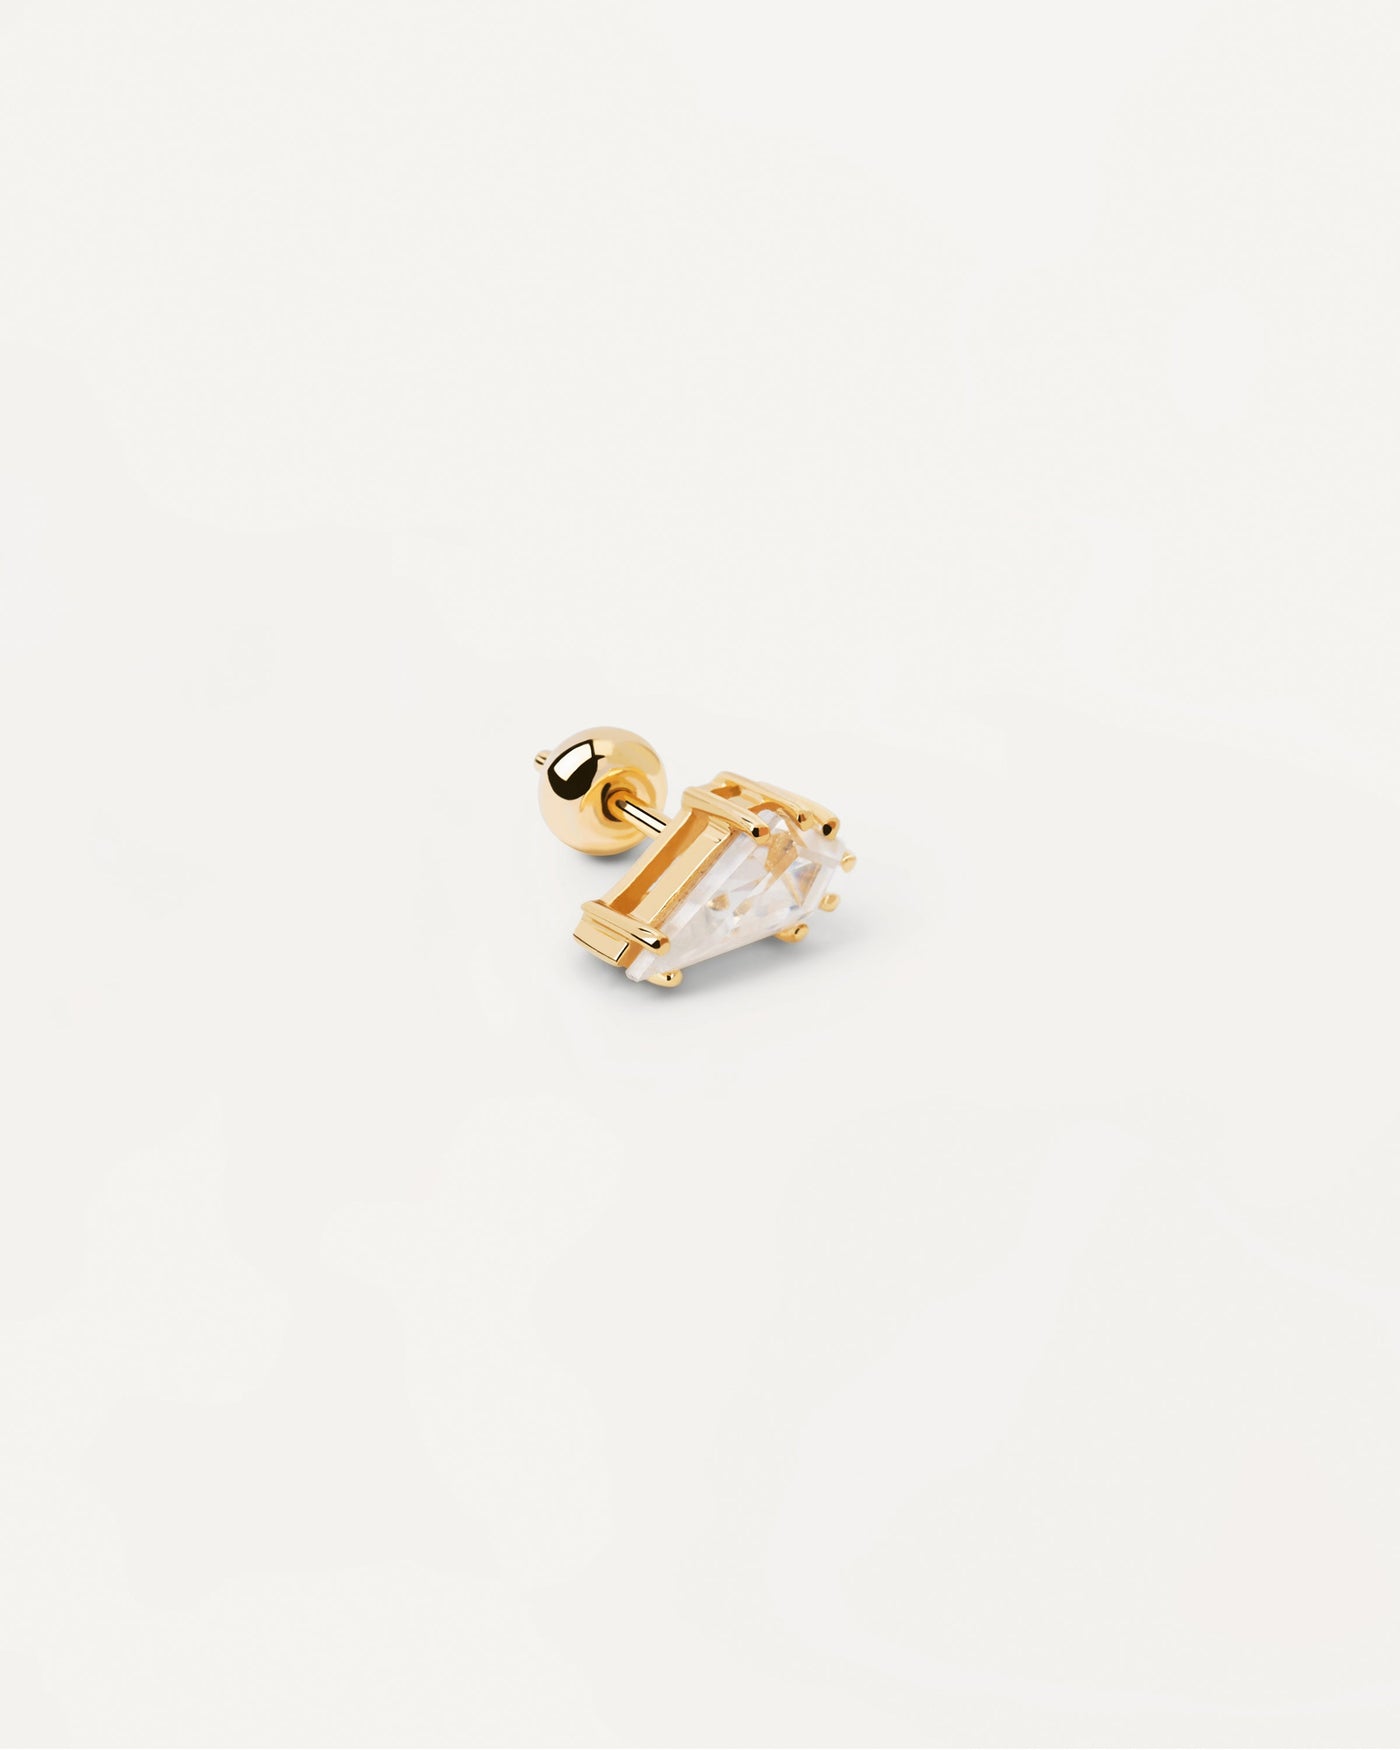 2023 Selection | Noa Single Earring. Gold-plated ear piercing with drop shaped white zirconia. Get the latest arrival from PDPAOLA. Place your order safely and get this Best Seller. Free Shipping.